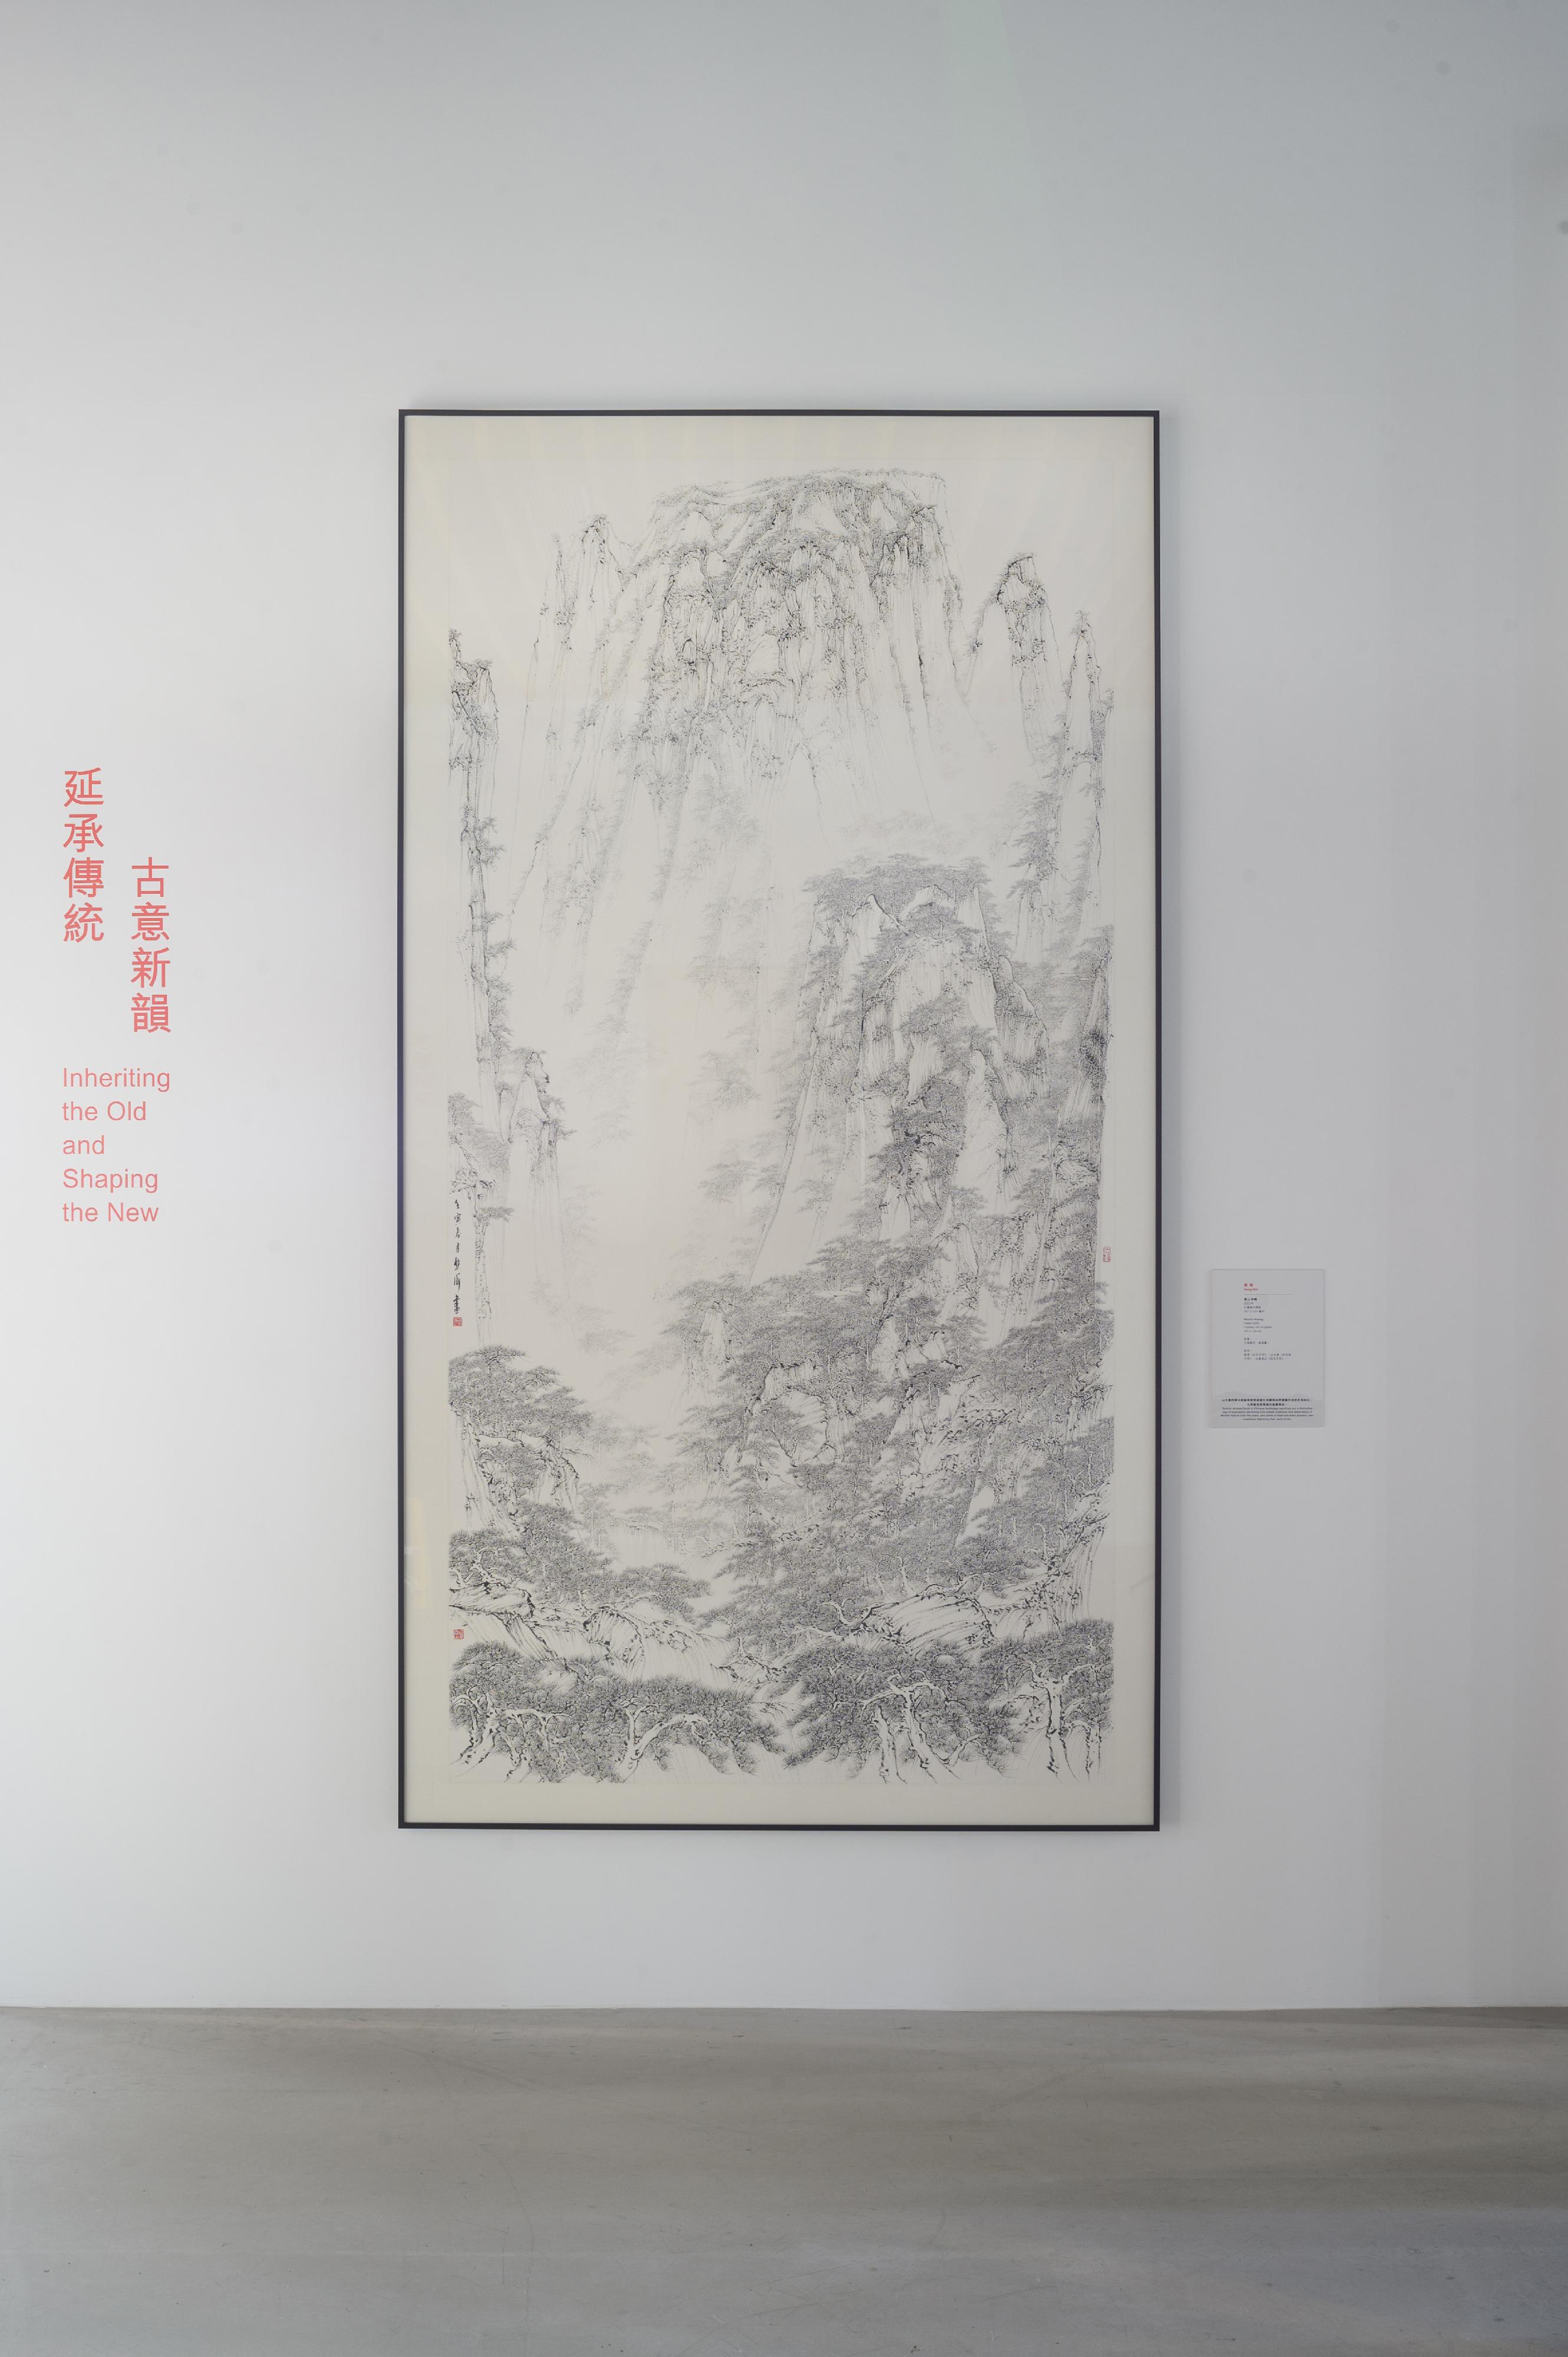 Archaic Curator Series: Seon1 - Cultural Symbols of Chinese Landscape Painting will be on display at Oi! Glassie from today (December 9). Photo shows artist Hung Hoi's artwork "Mount Huang".